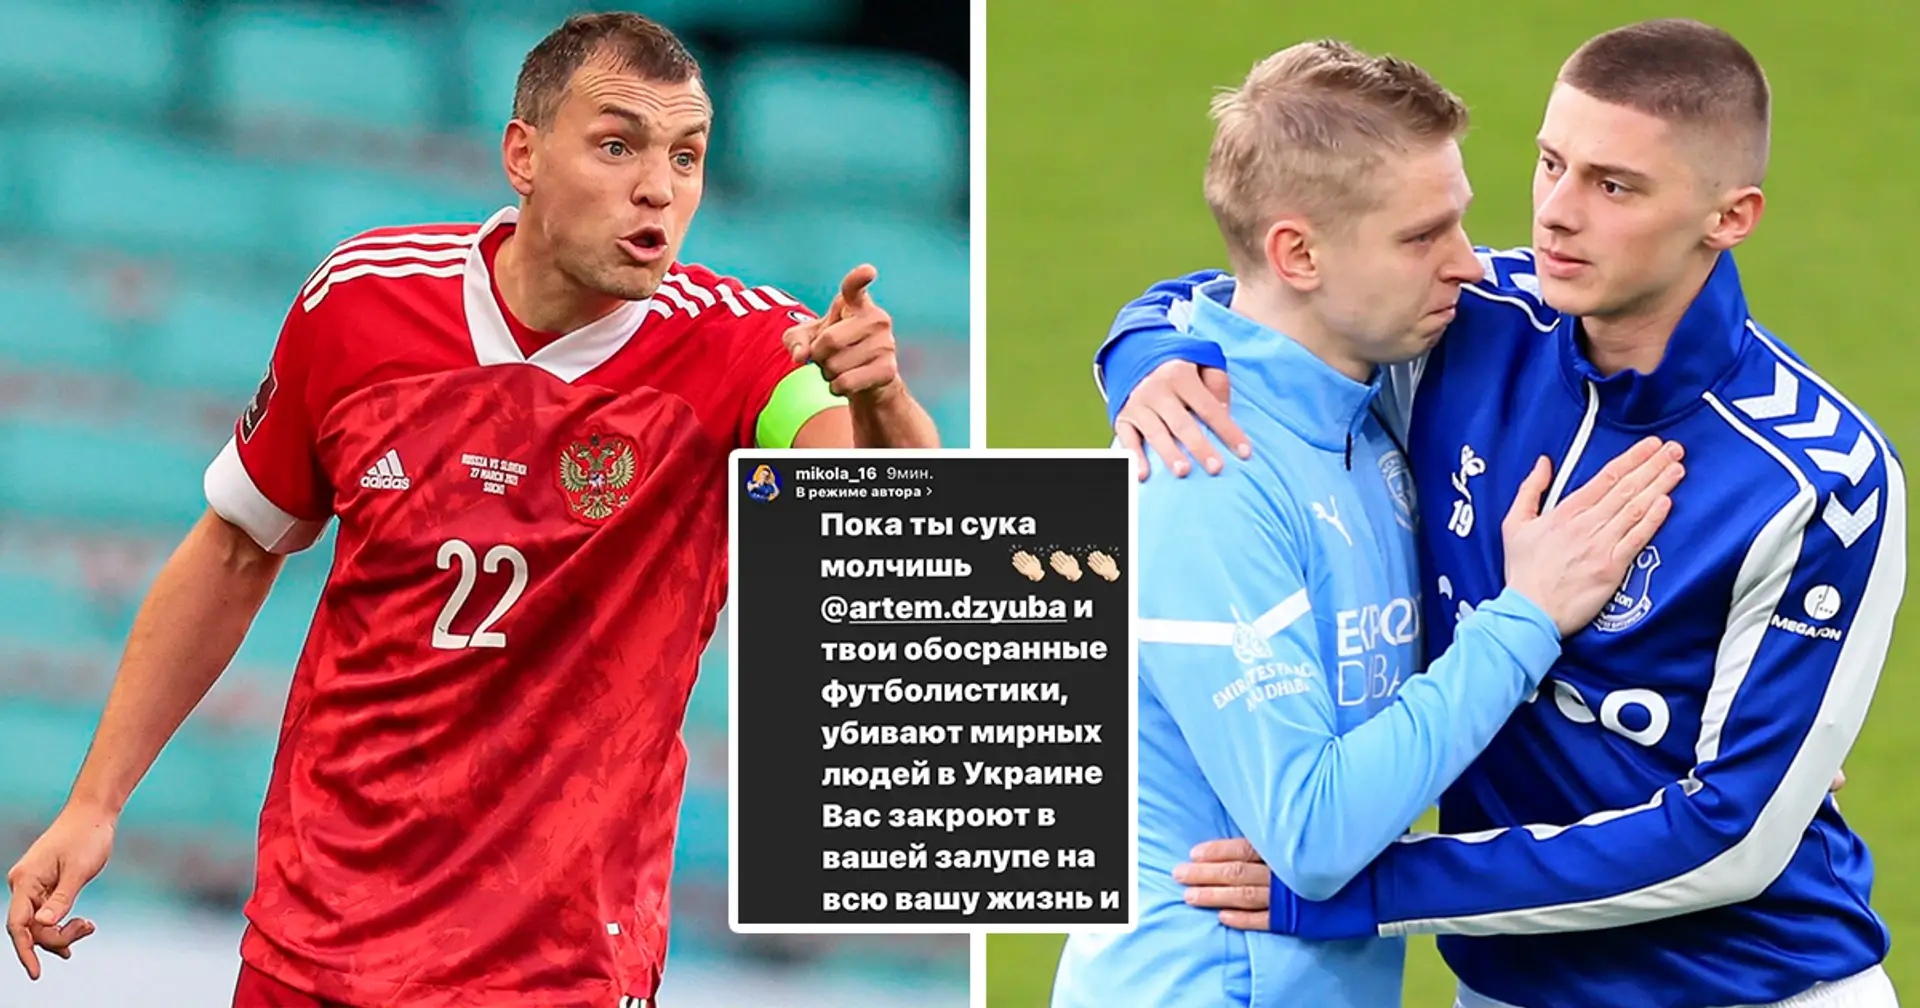 'All they can do is talk': Russia NT captain Dzyuba insults Mykolenko after Ukrainian's cry for help